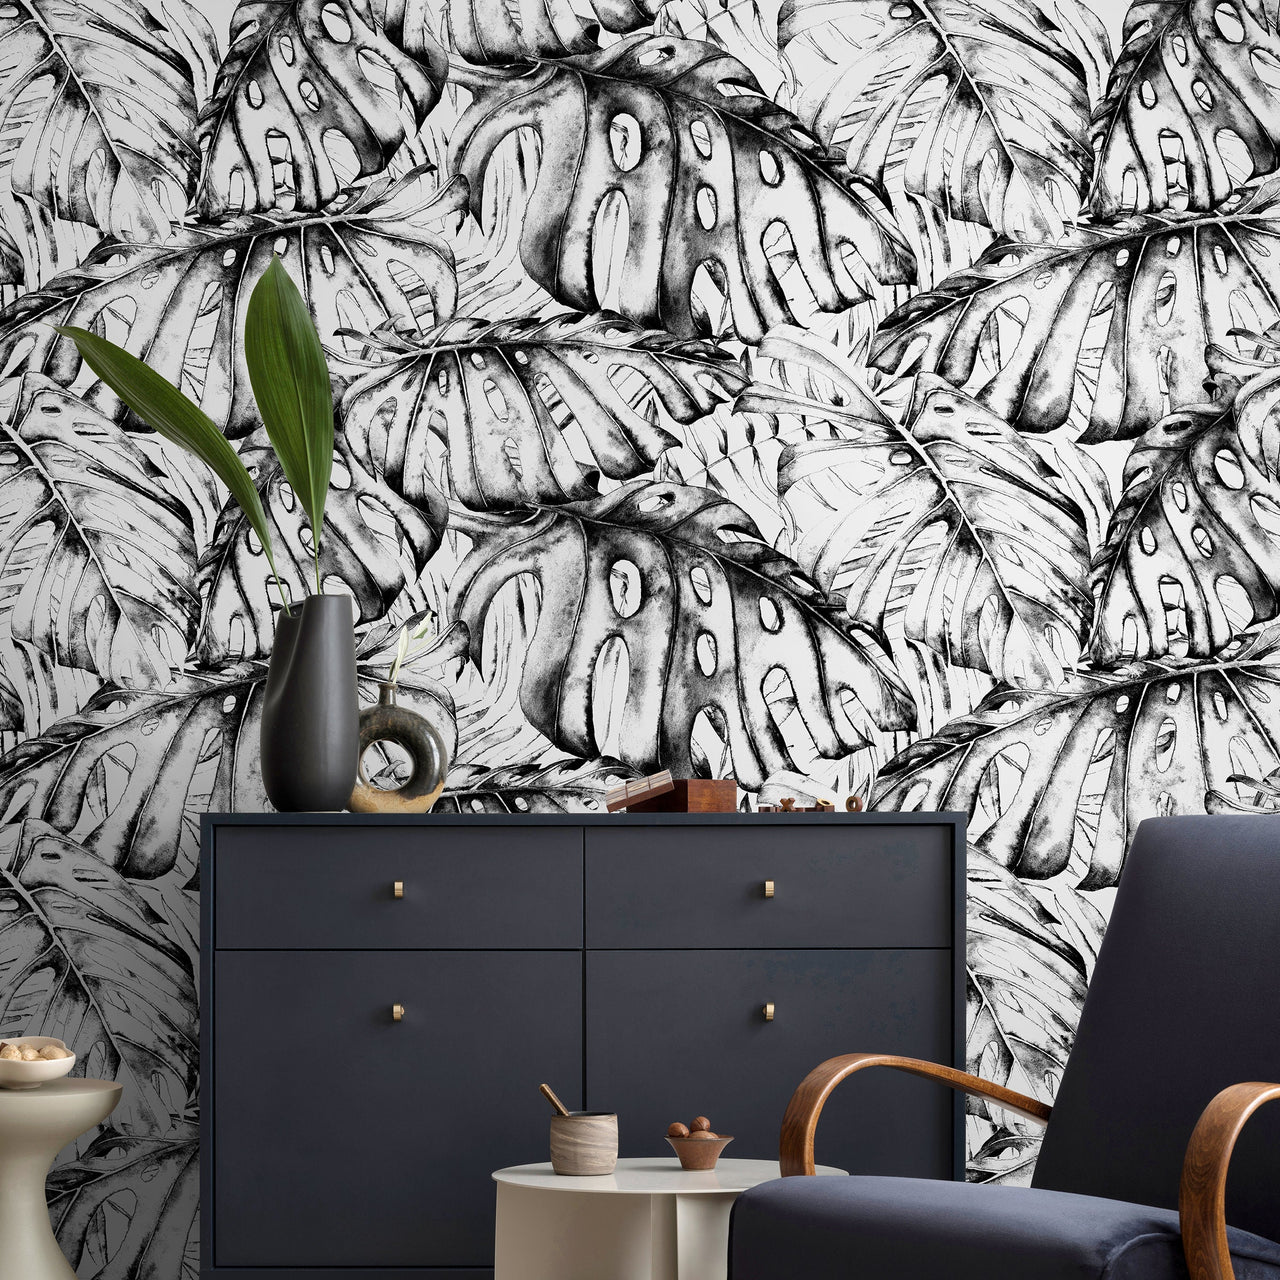 Wall Decor Wallpaper Peel and Stick Wallpaper Removable Wallpaper Home Decor Wall Art Room Decor / Black and White Leaves Wallpaper - B778